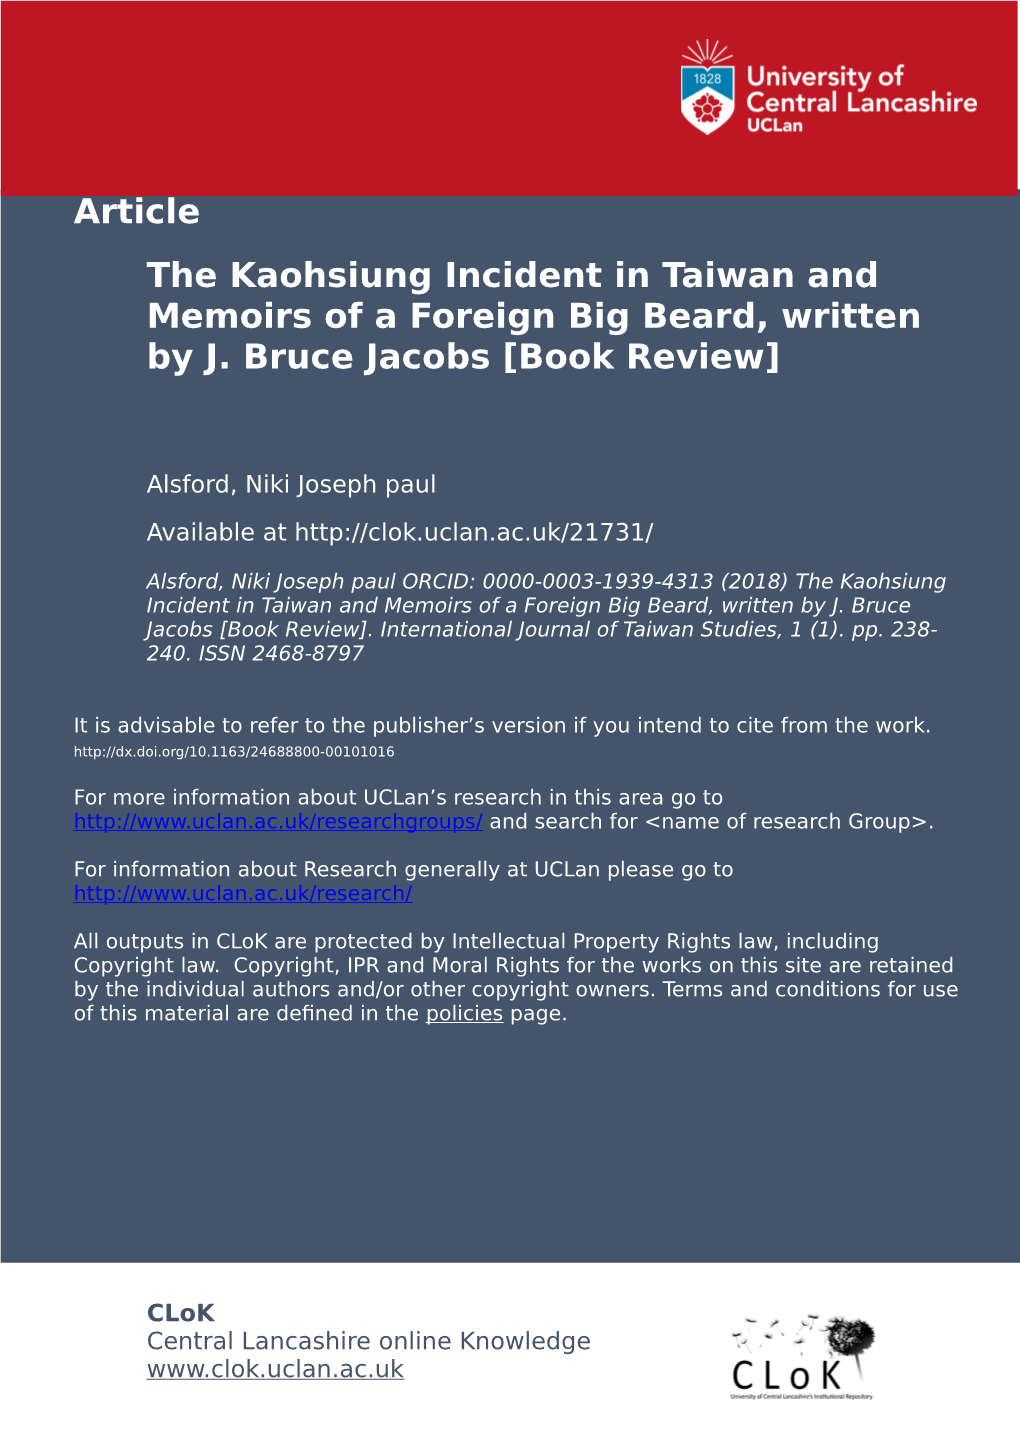 Jacobs, J. Bruce, the Kaohsiung Incident in Taiwan and Memoirs of a Foreign Big Beard, 2016, Leiden, BRILL, Xii, 178 Pp